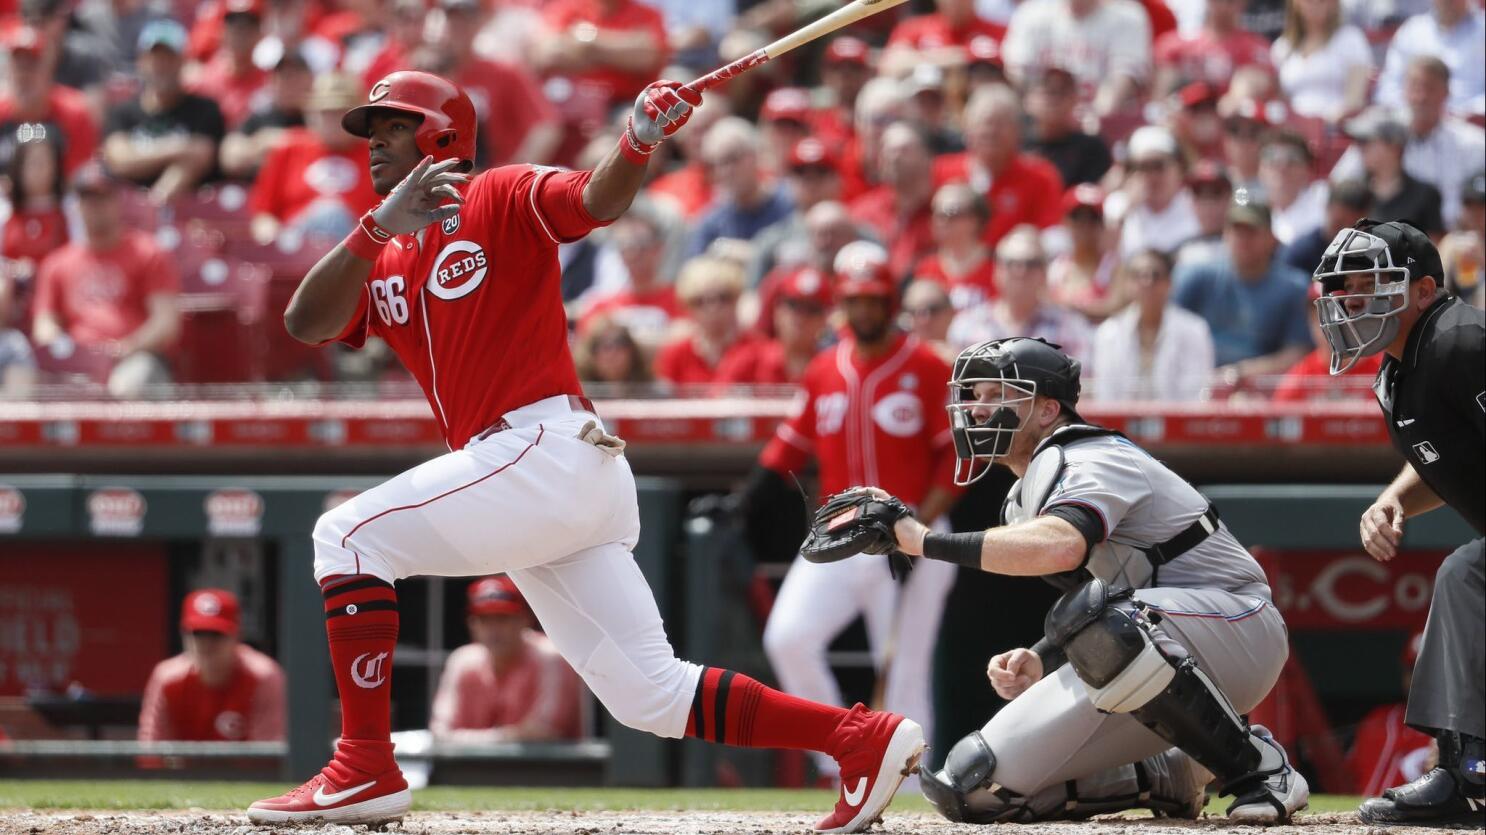 Cincinnati Reds' Yasiel Puig's time with the club in photos